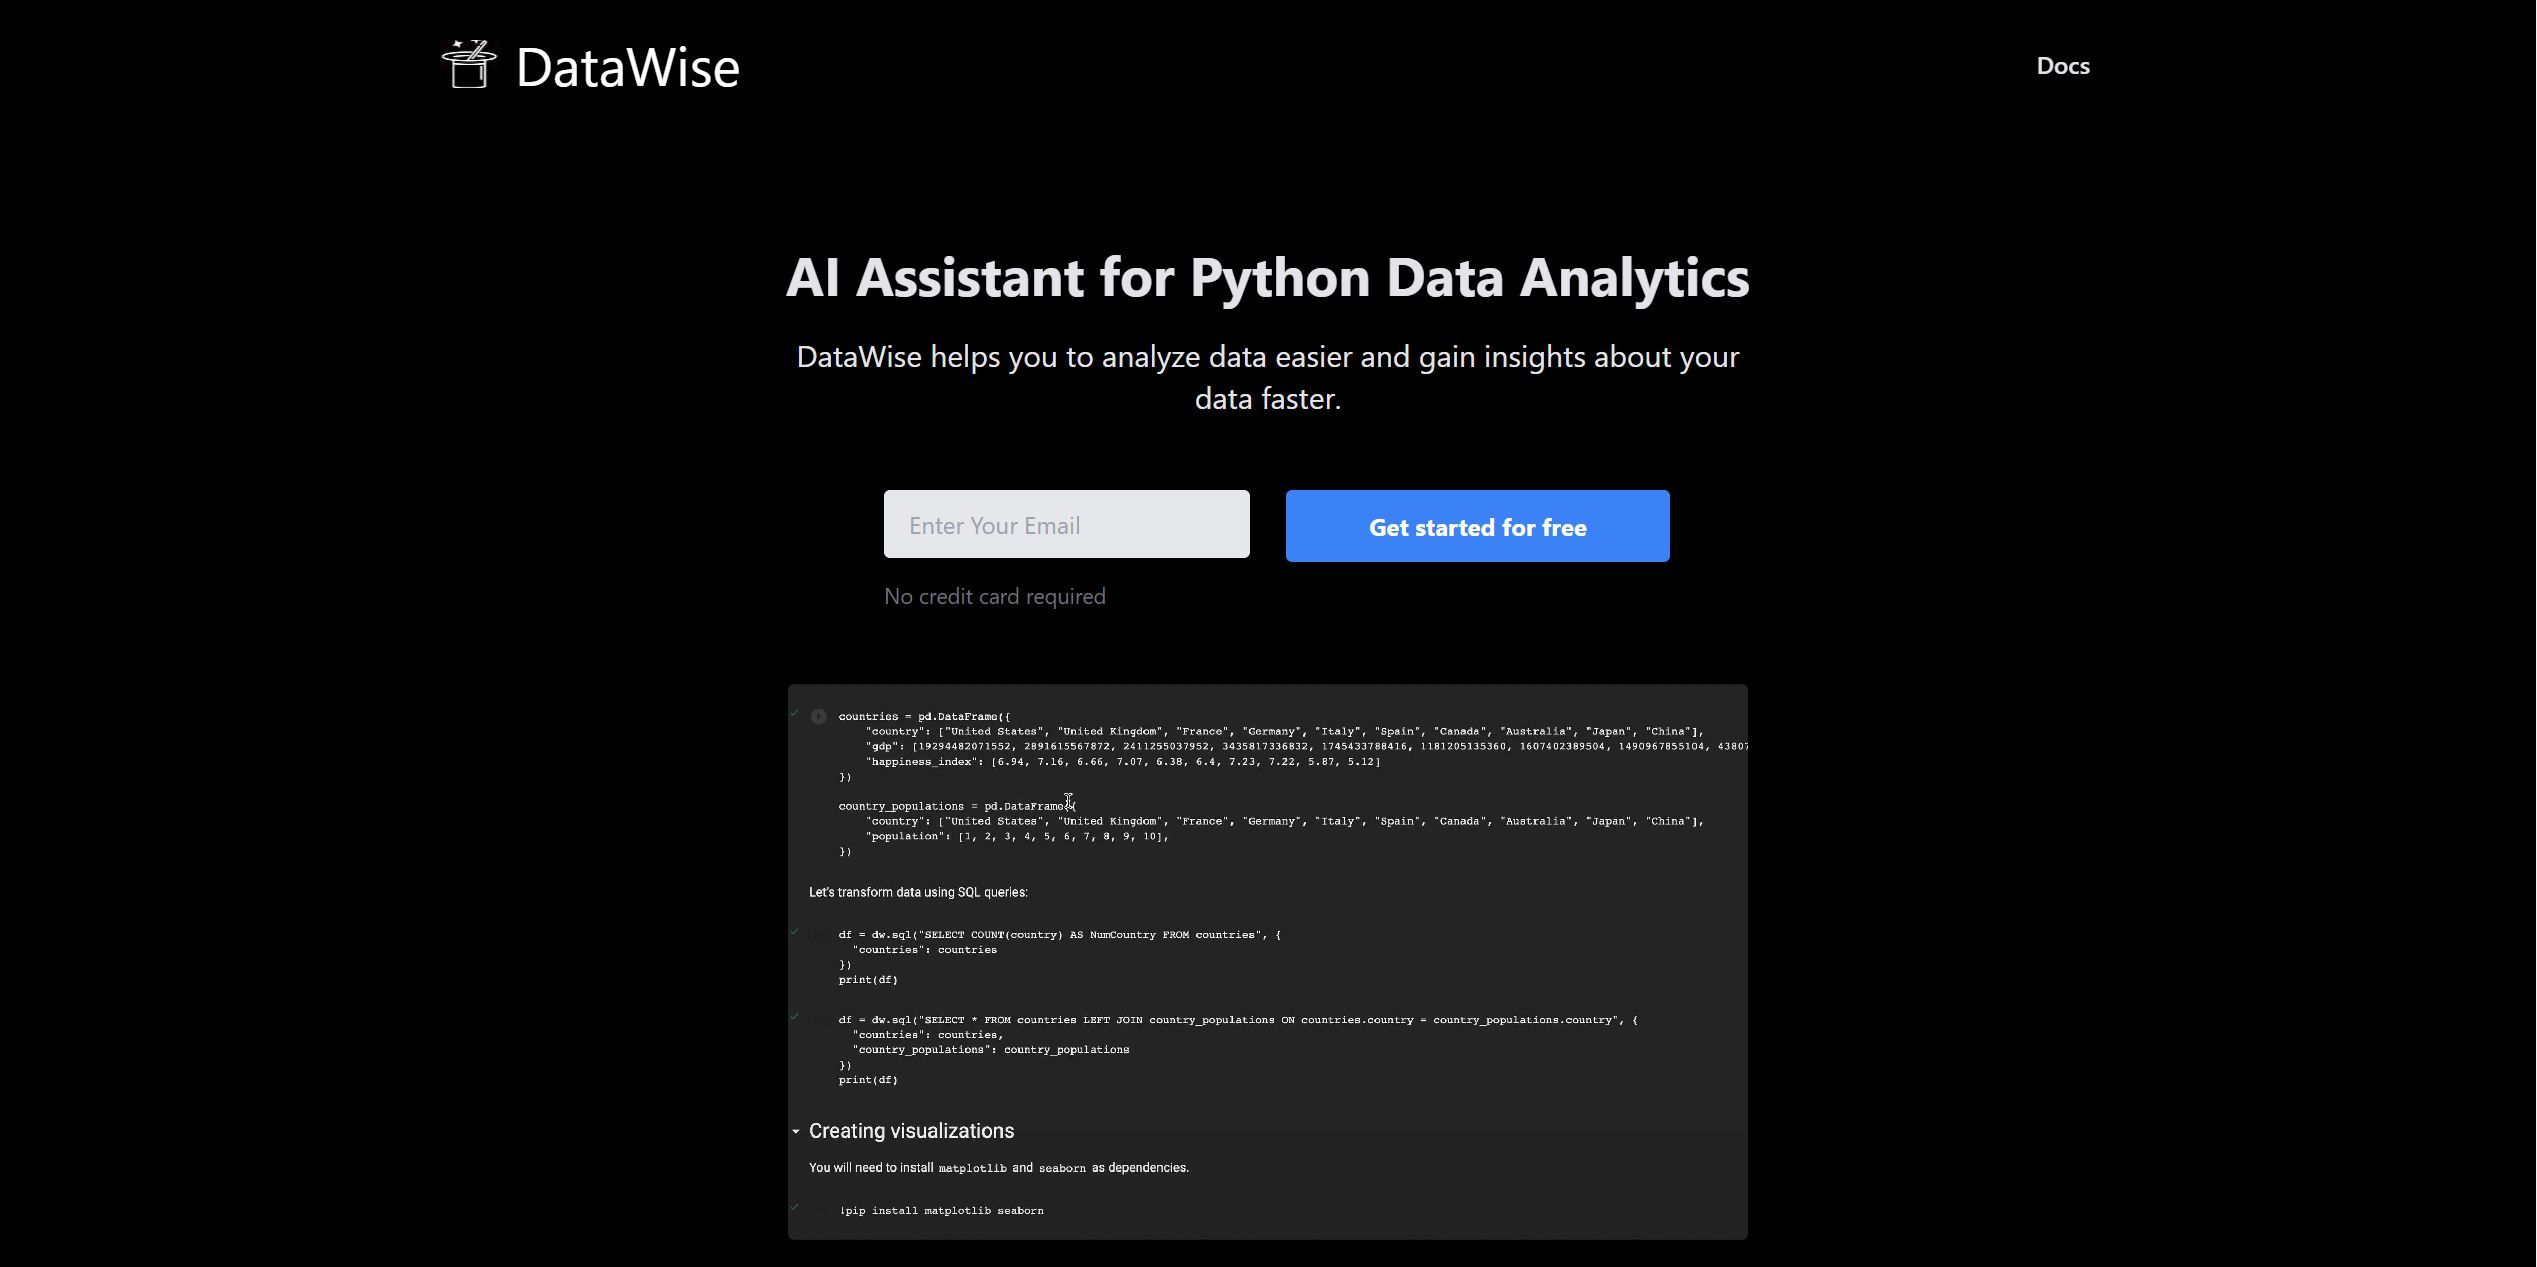  AI Assistant for Python Data Analytics